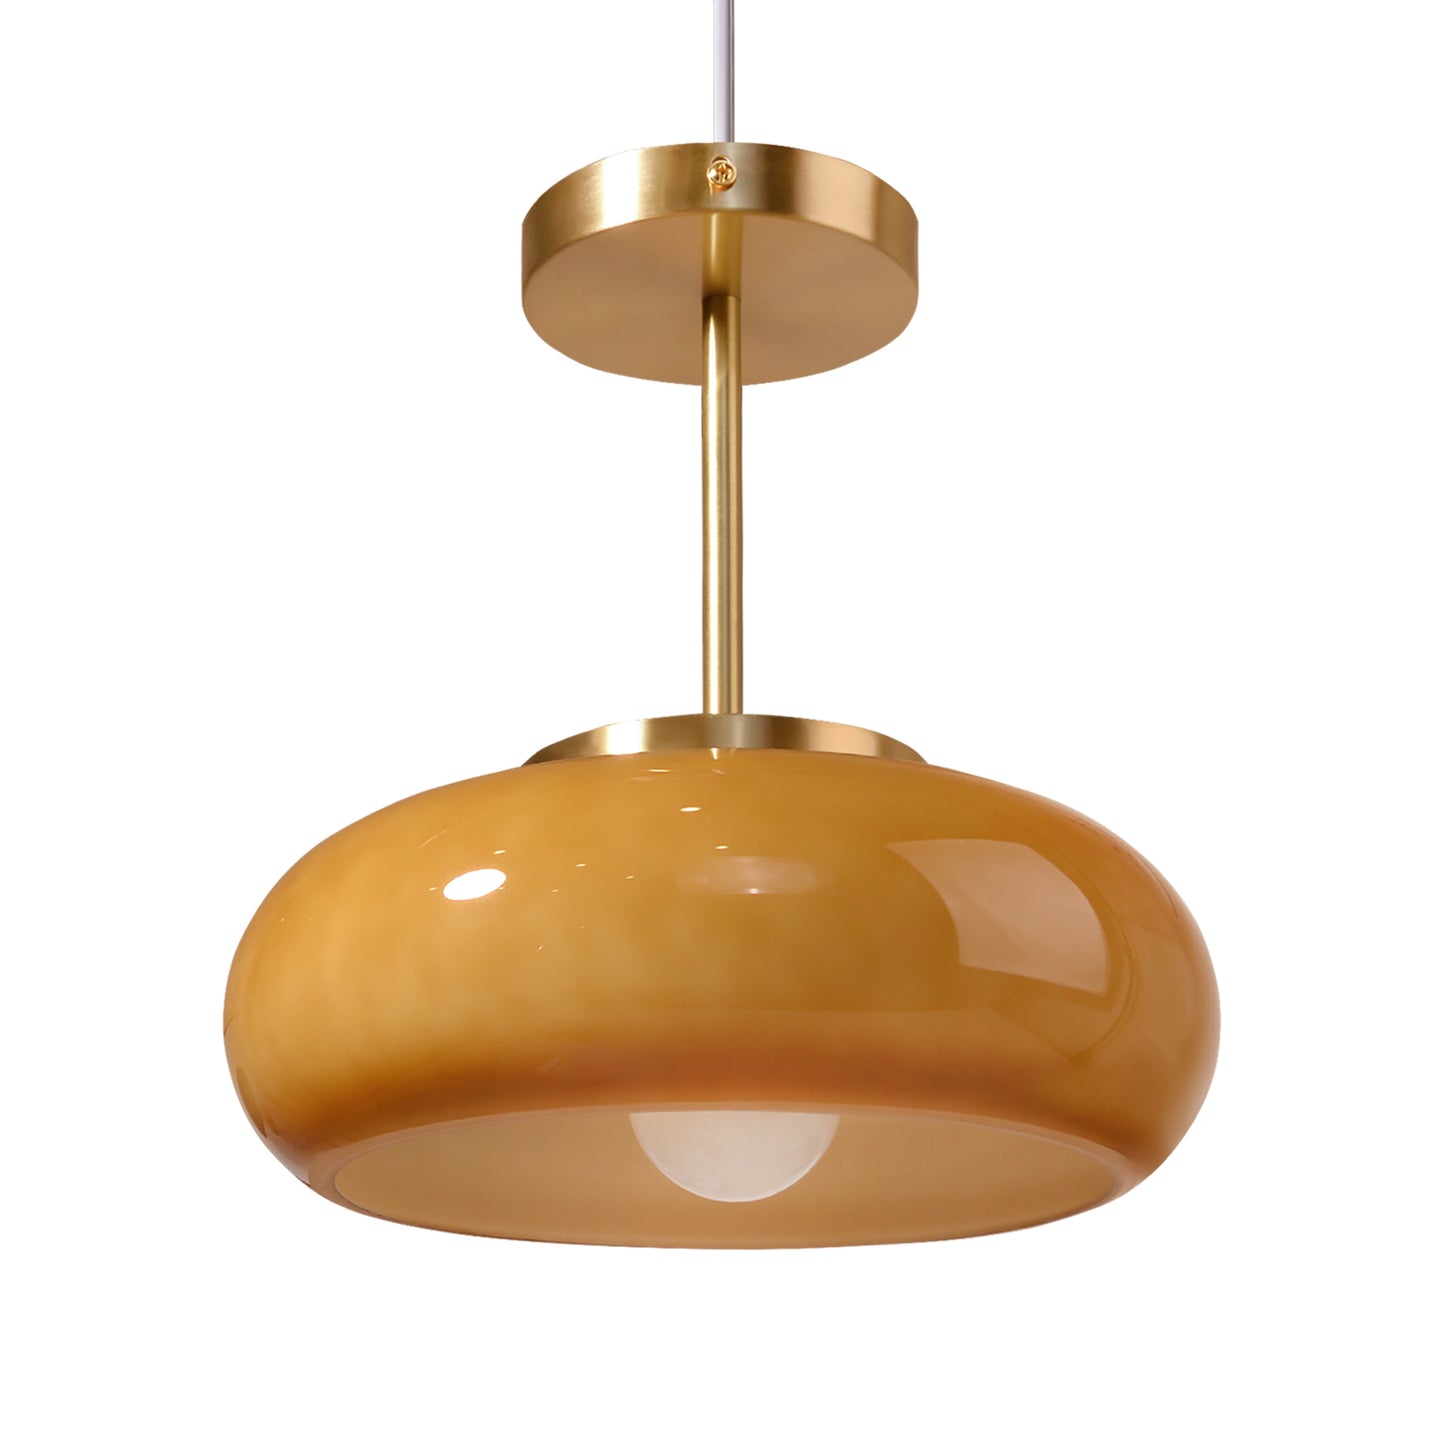 (M)Glass Pendant Lighting,Hanging Ceiling Light with Yellow Glass Shade for Kitchen Island or Entryway,Vintage Brass